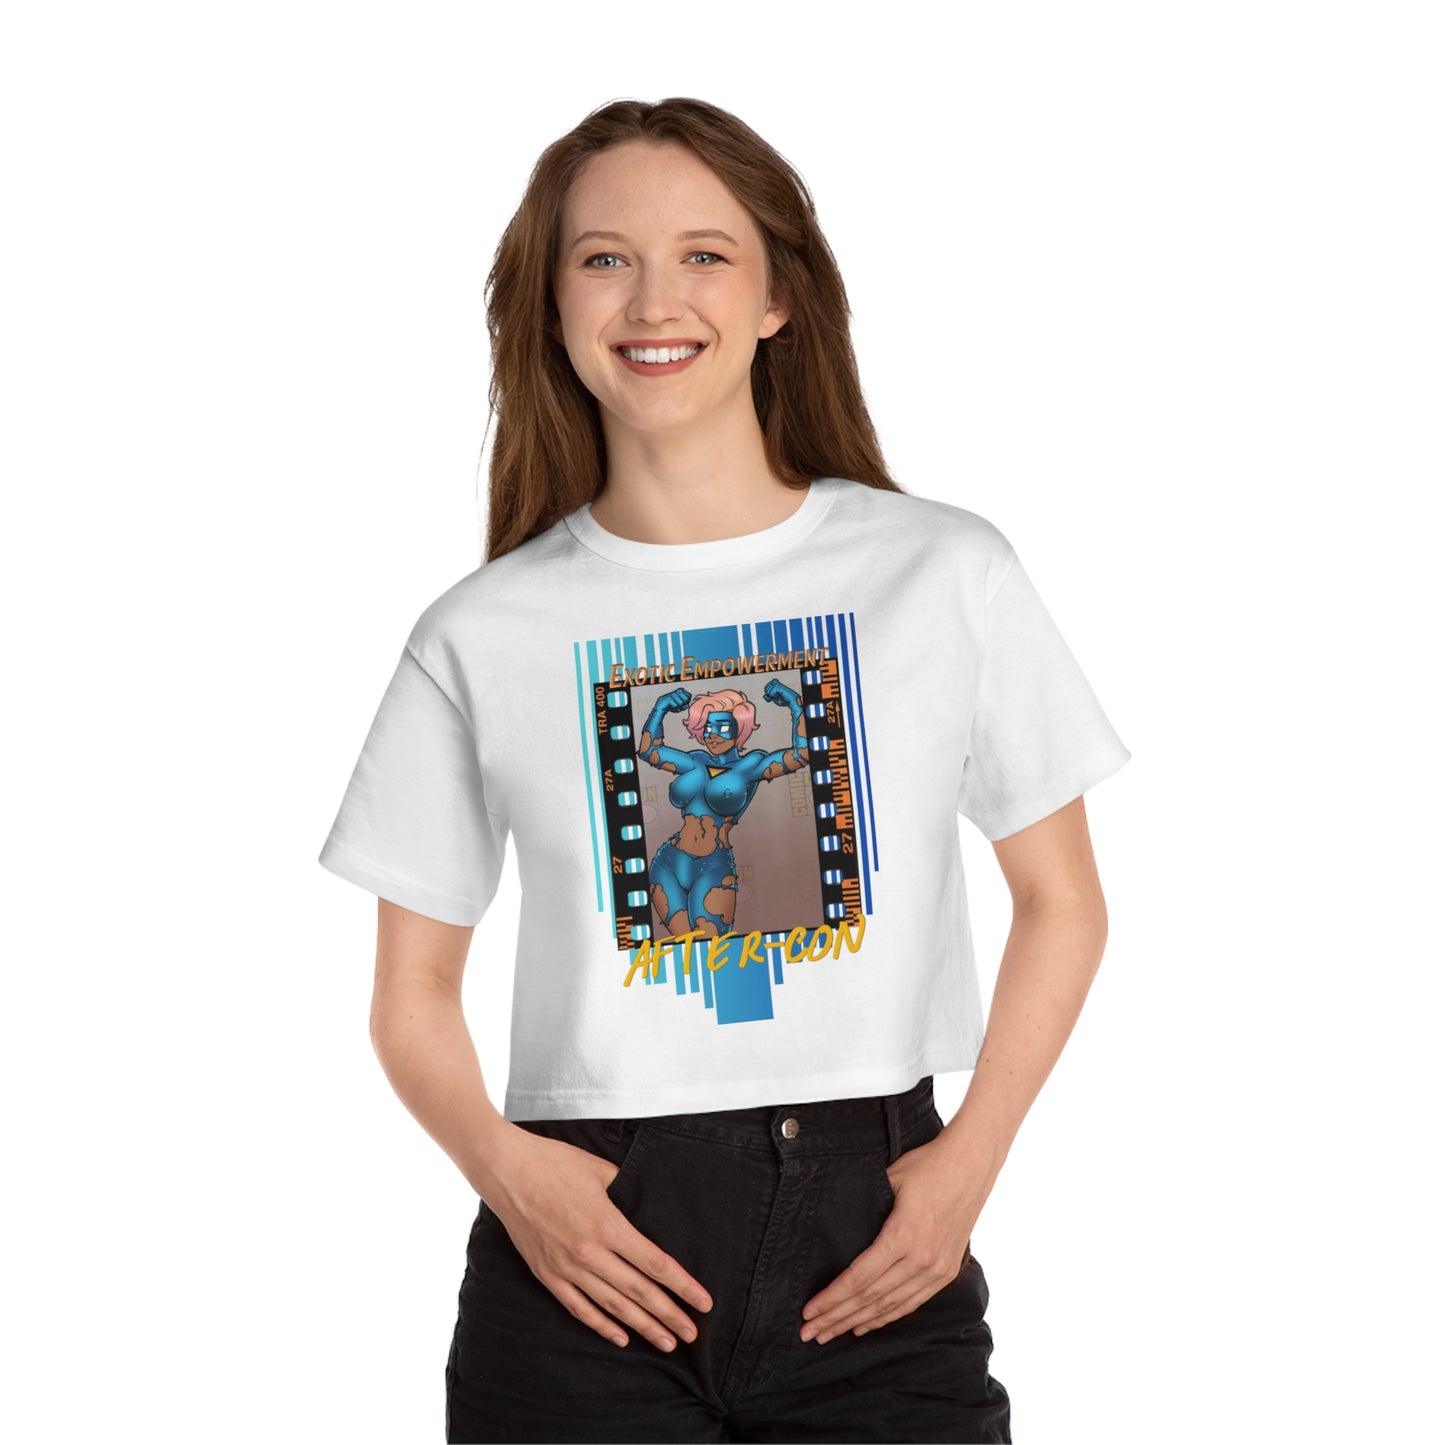 After-Con "Exotic Empowerment" Heritage Cropped T-Shirt